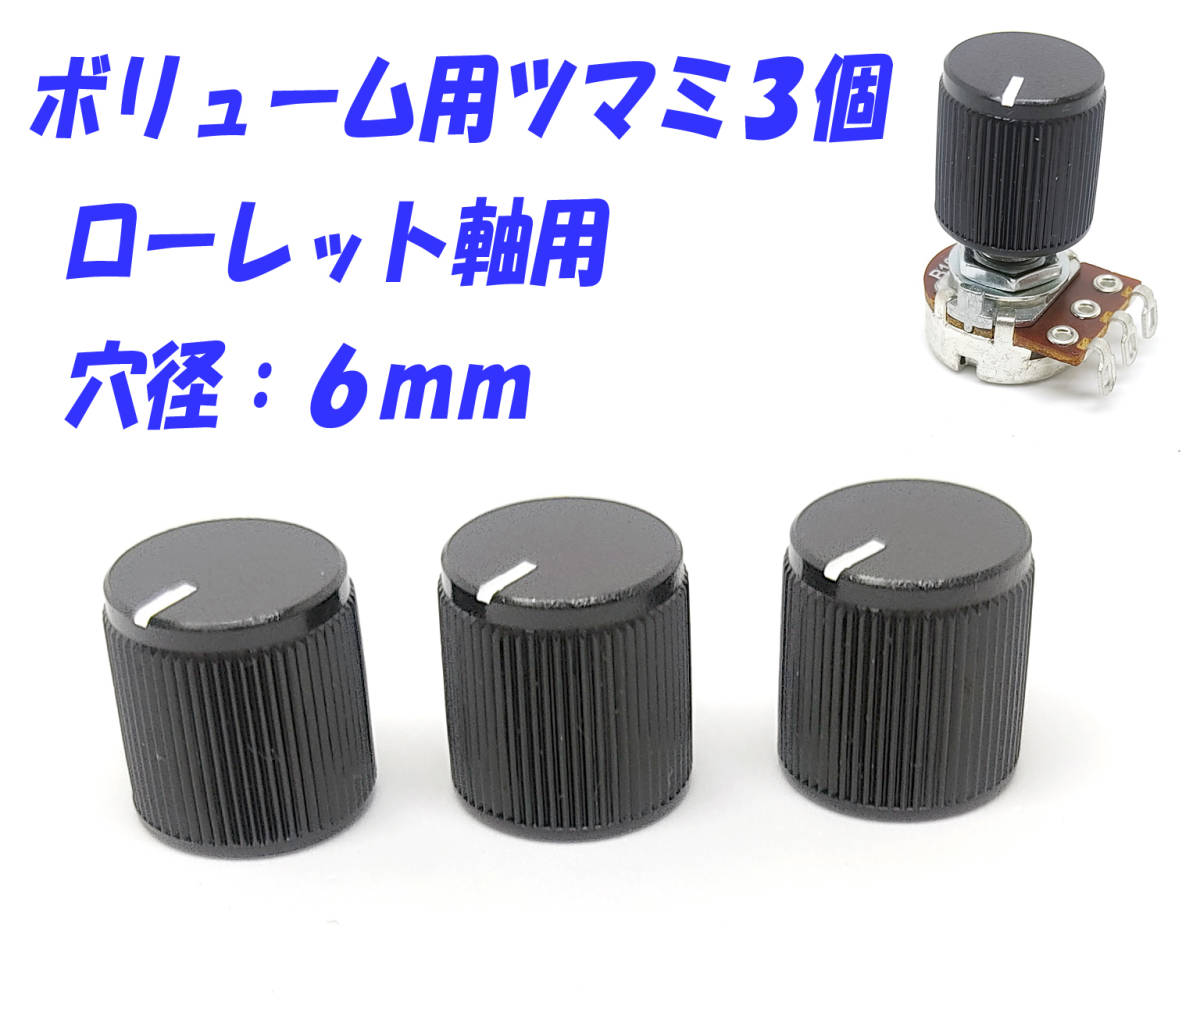 16mm for volume knob 3 piece set small size (Φ16) all-purpose volume for hole diameter 6mm installation axis low let specification for switch knob anonymity distribution including postage 